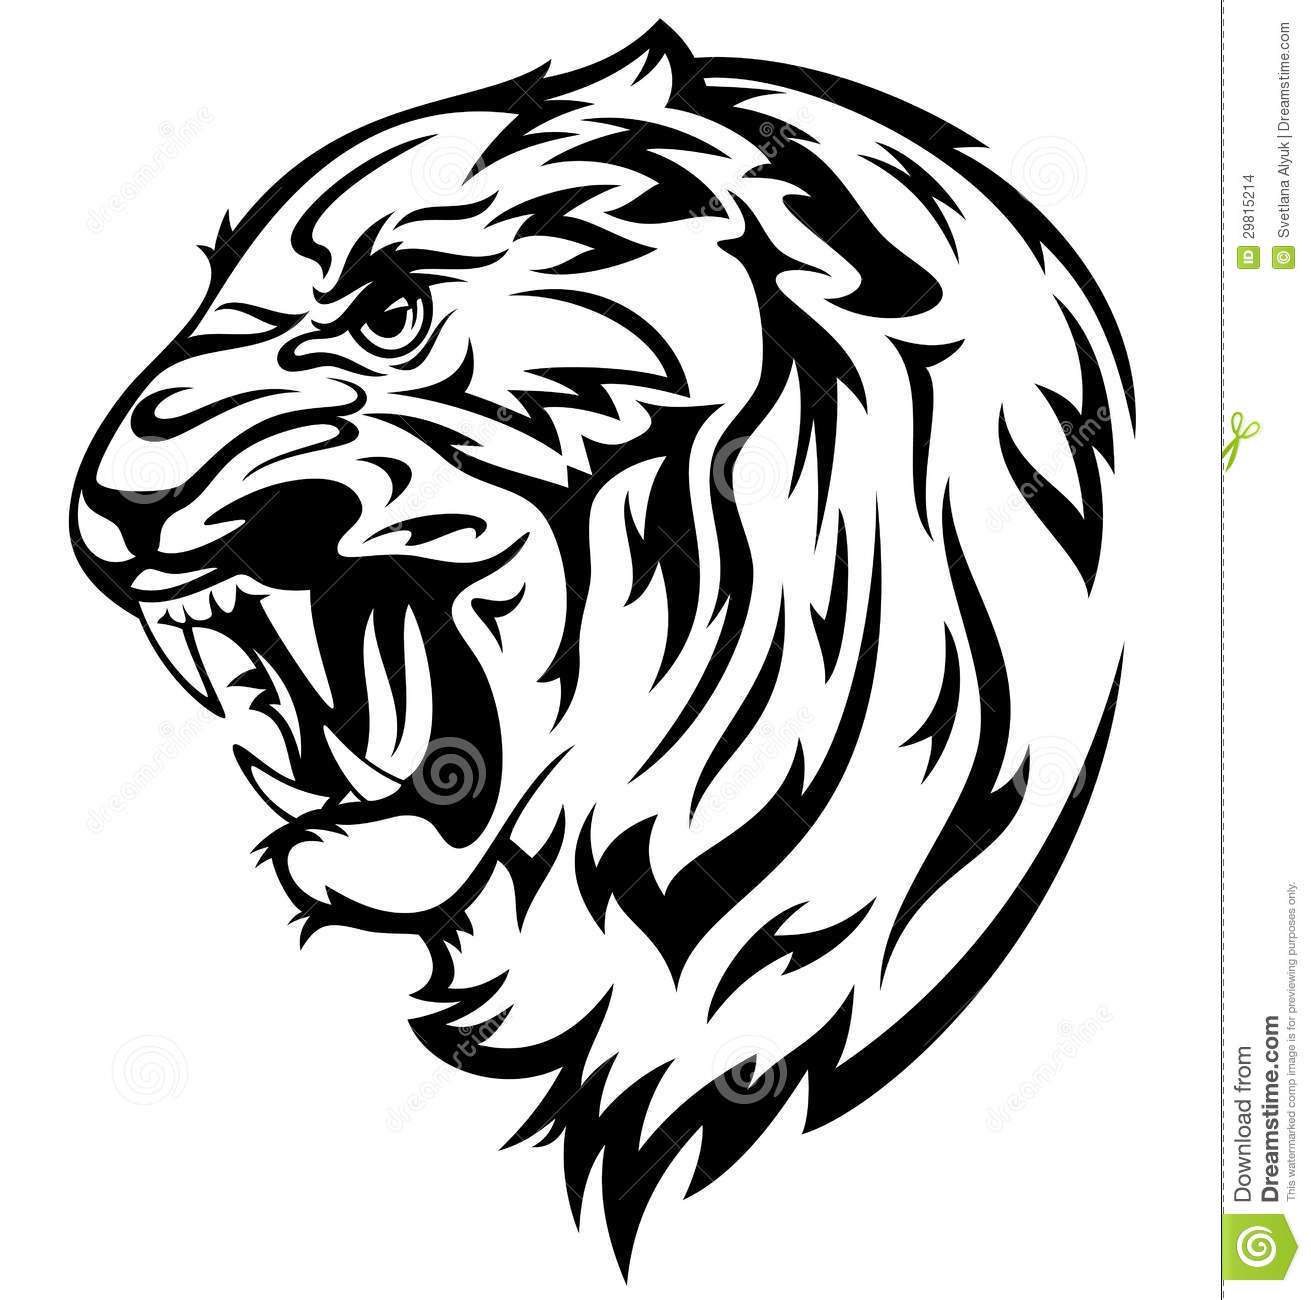 Furious Tiger Illustration   Realistic Black And White Outline Of